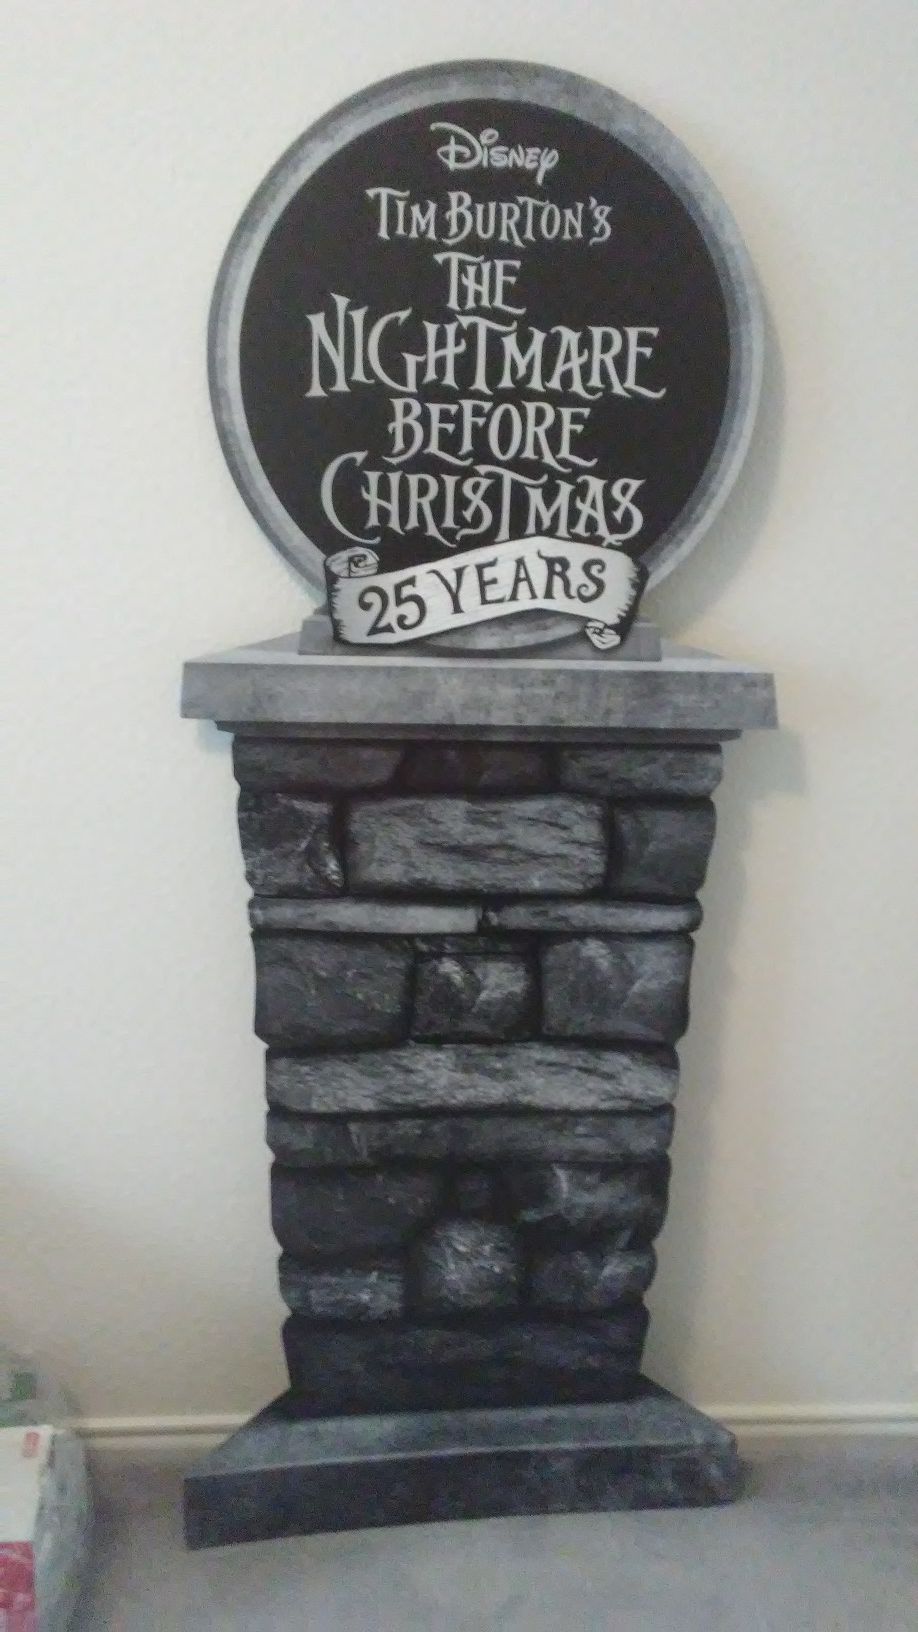 NIGHTMARE BEFORE CHRISTMAS 25th ANNIVERSARY 4"11 in.DISPLAY SIGN